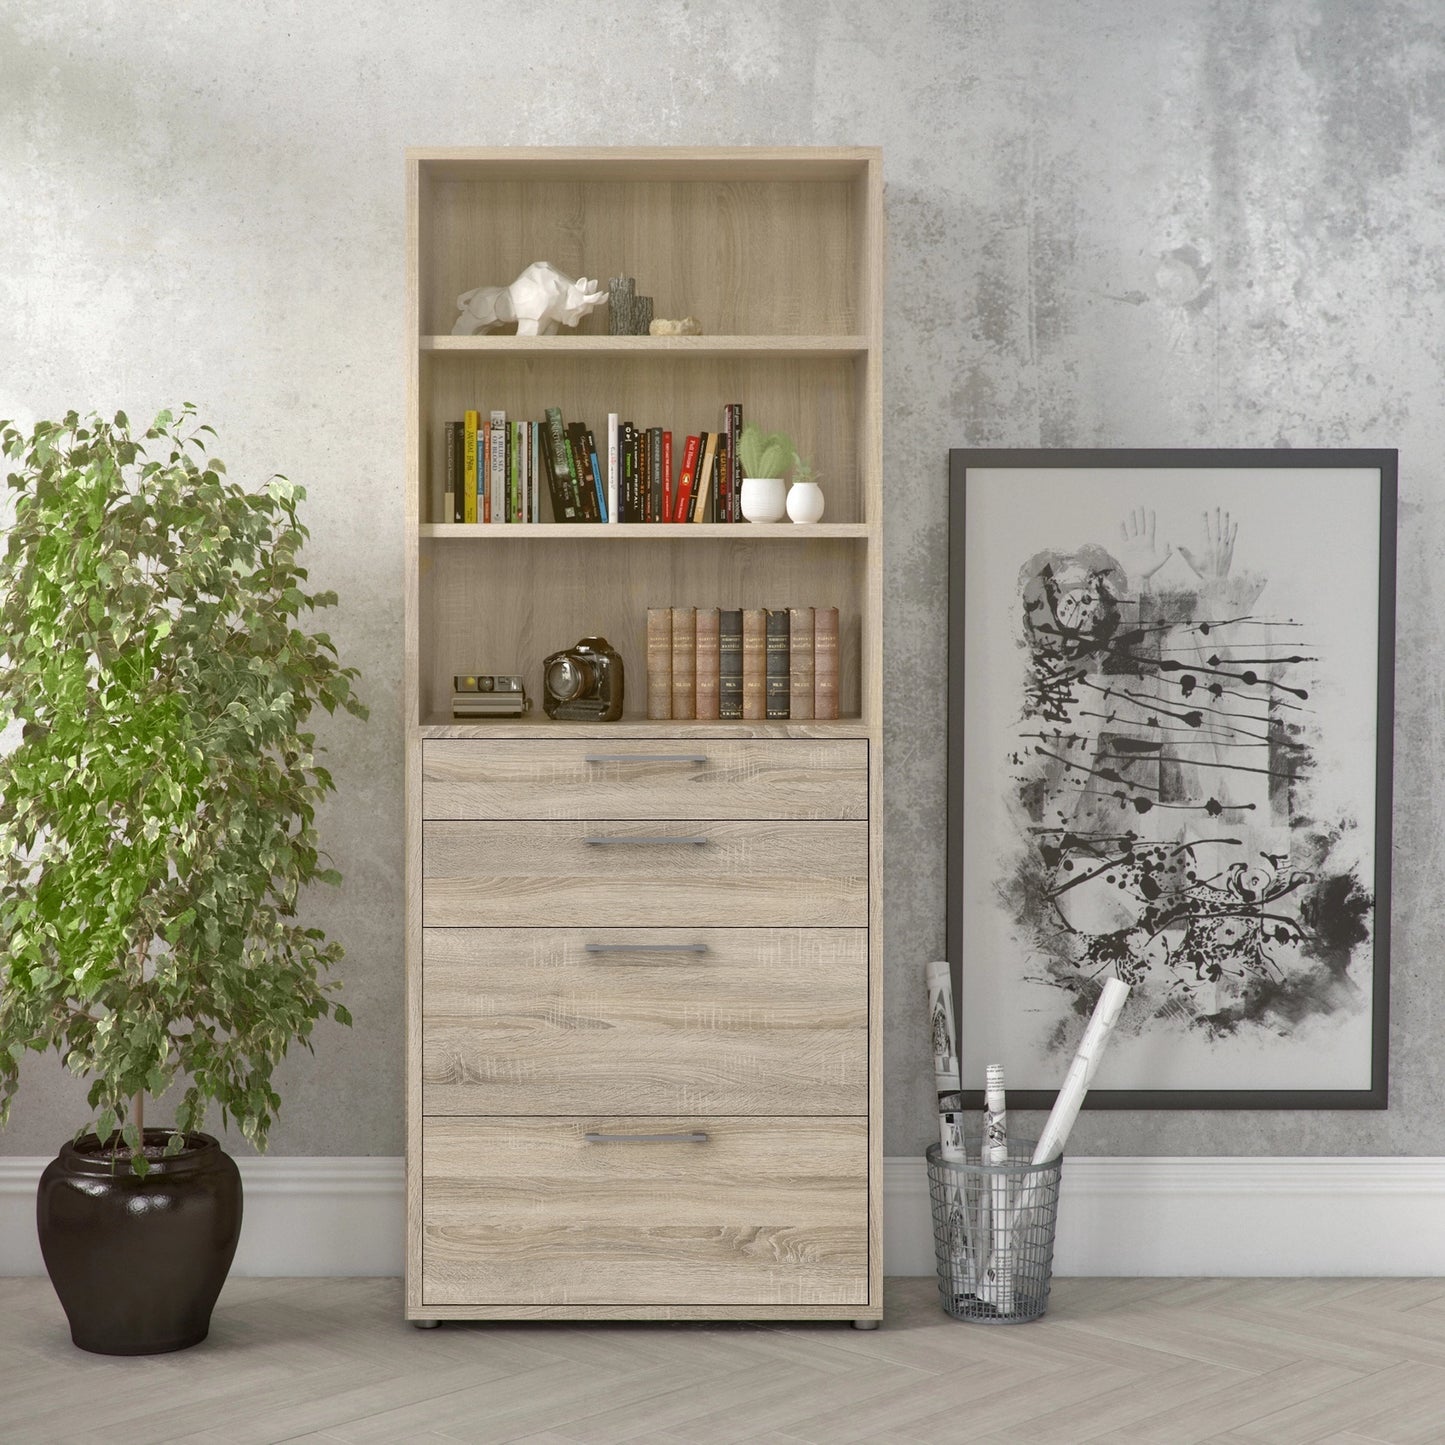 Furniture To Go Prima Bookcase 2 Shelves with 2 Drawers + 2 File Drawers in Oak